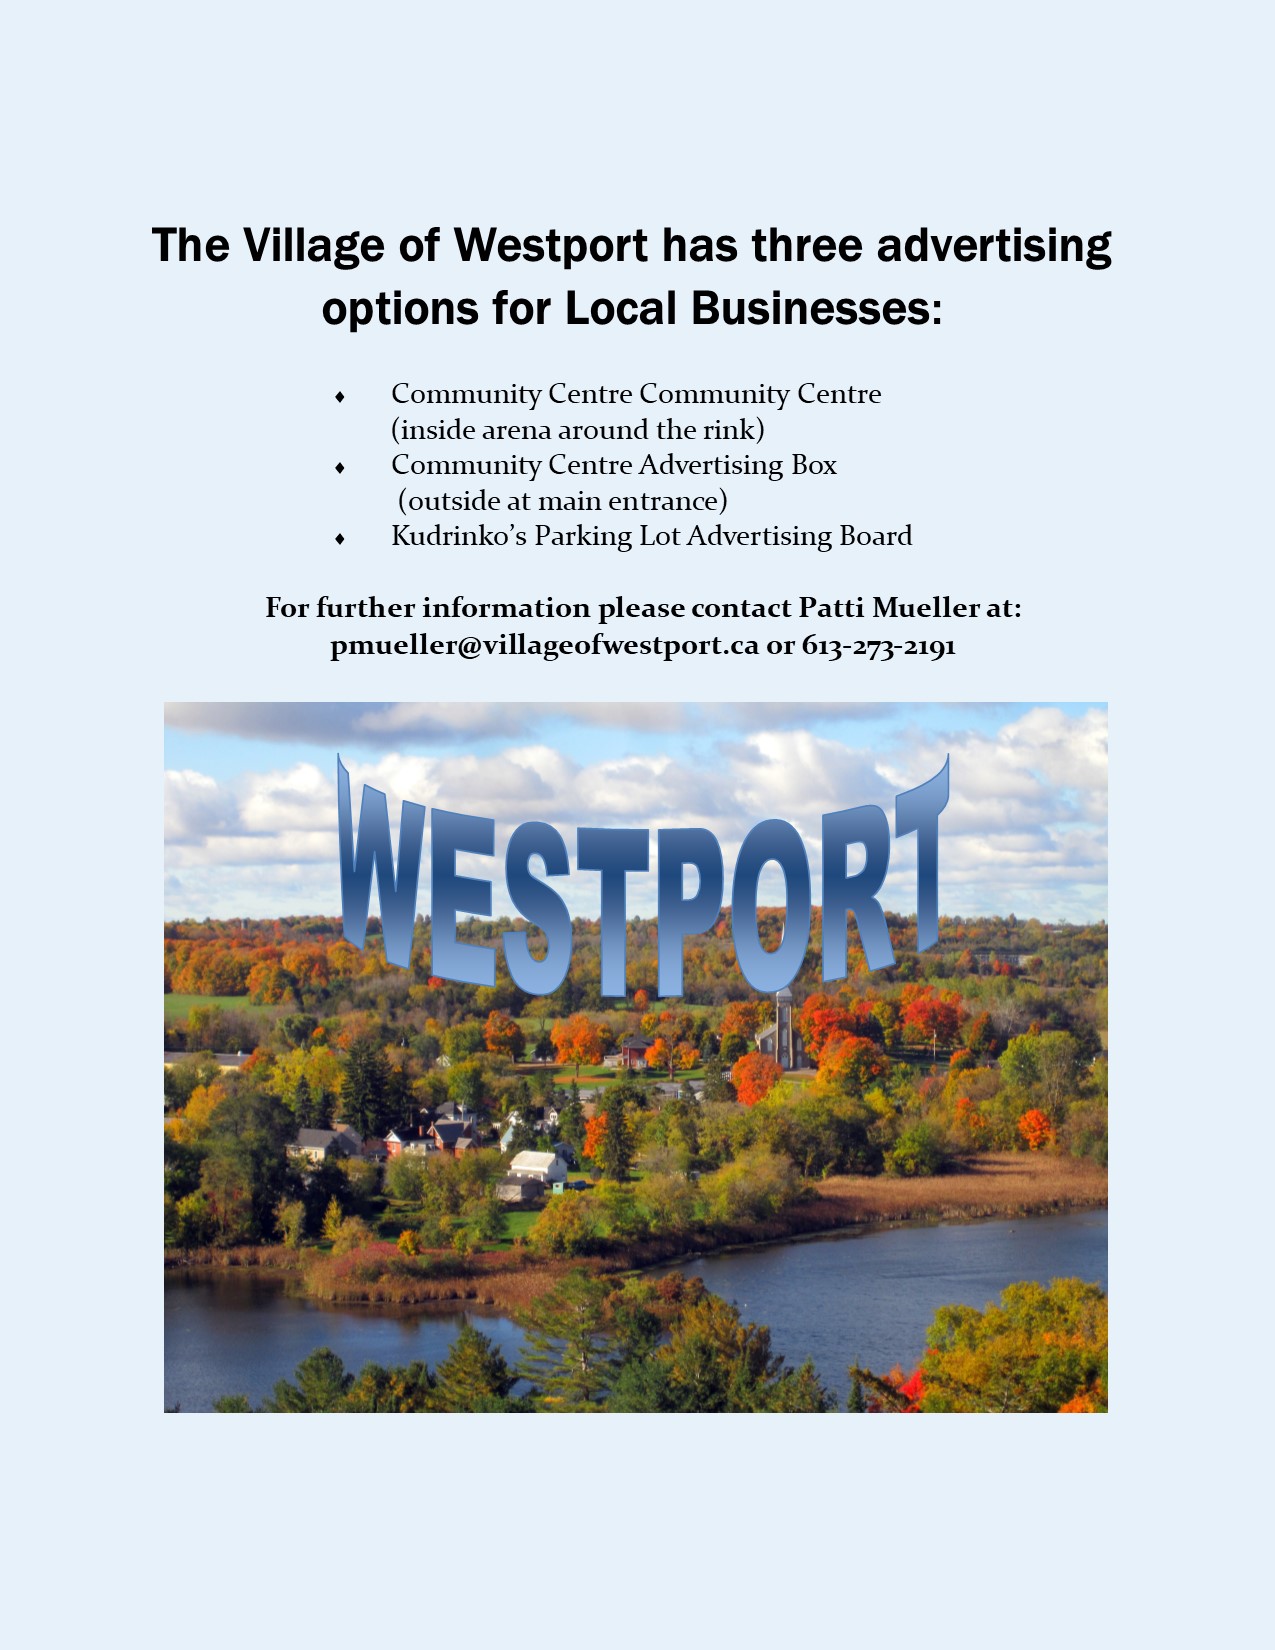 Advertising Opportunities for Local Business